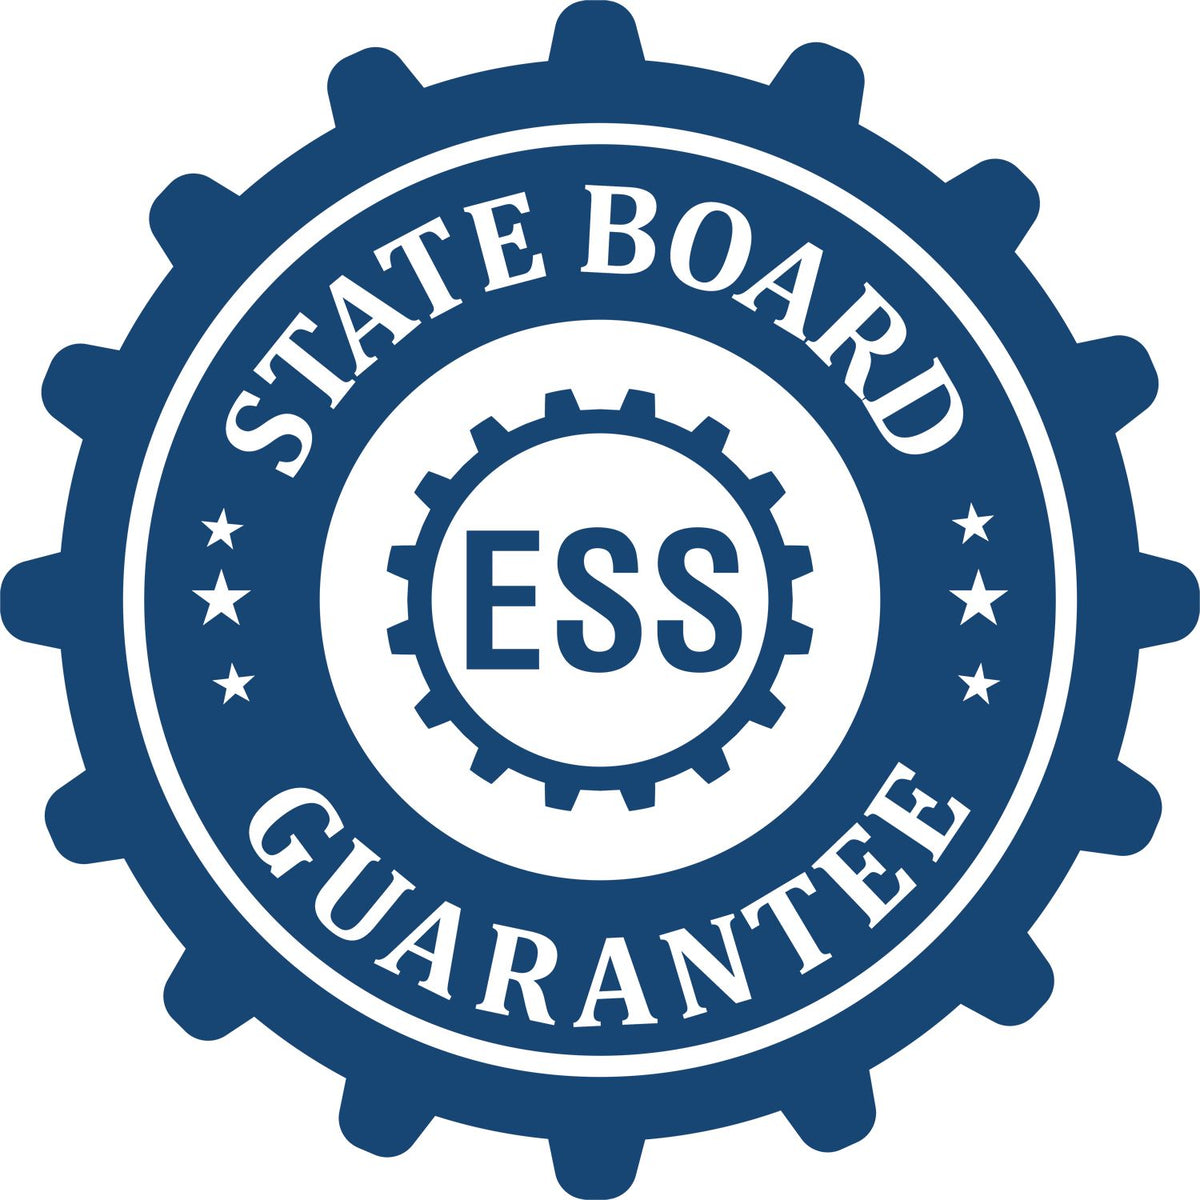 An emblem in a gear shape illustrating a state board guarantee for the Massachusetts Geologist Desk Seal